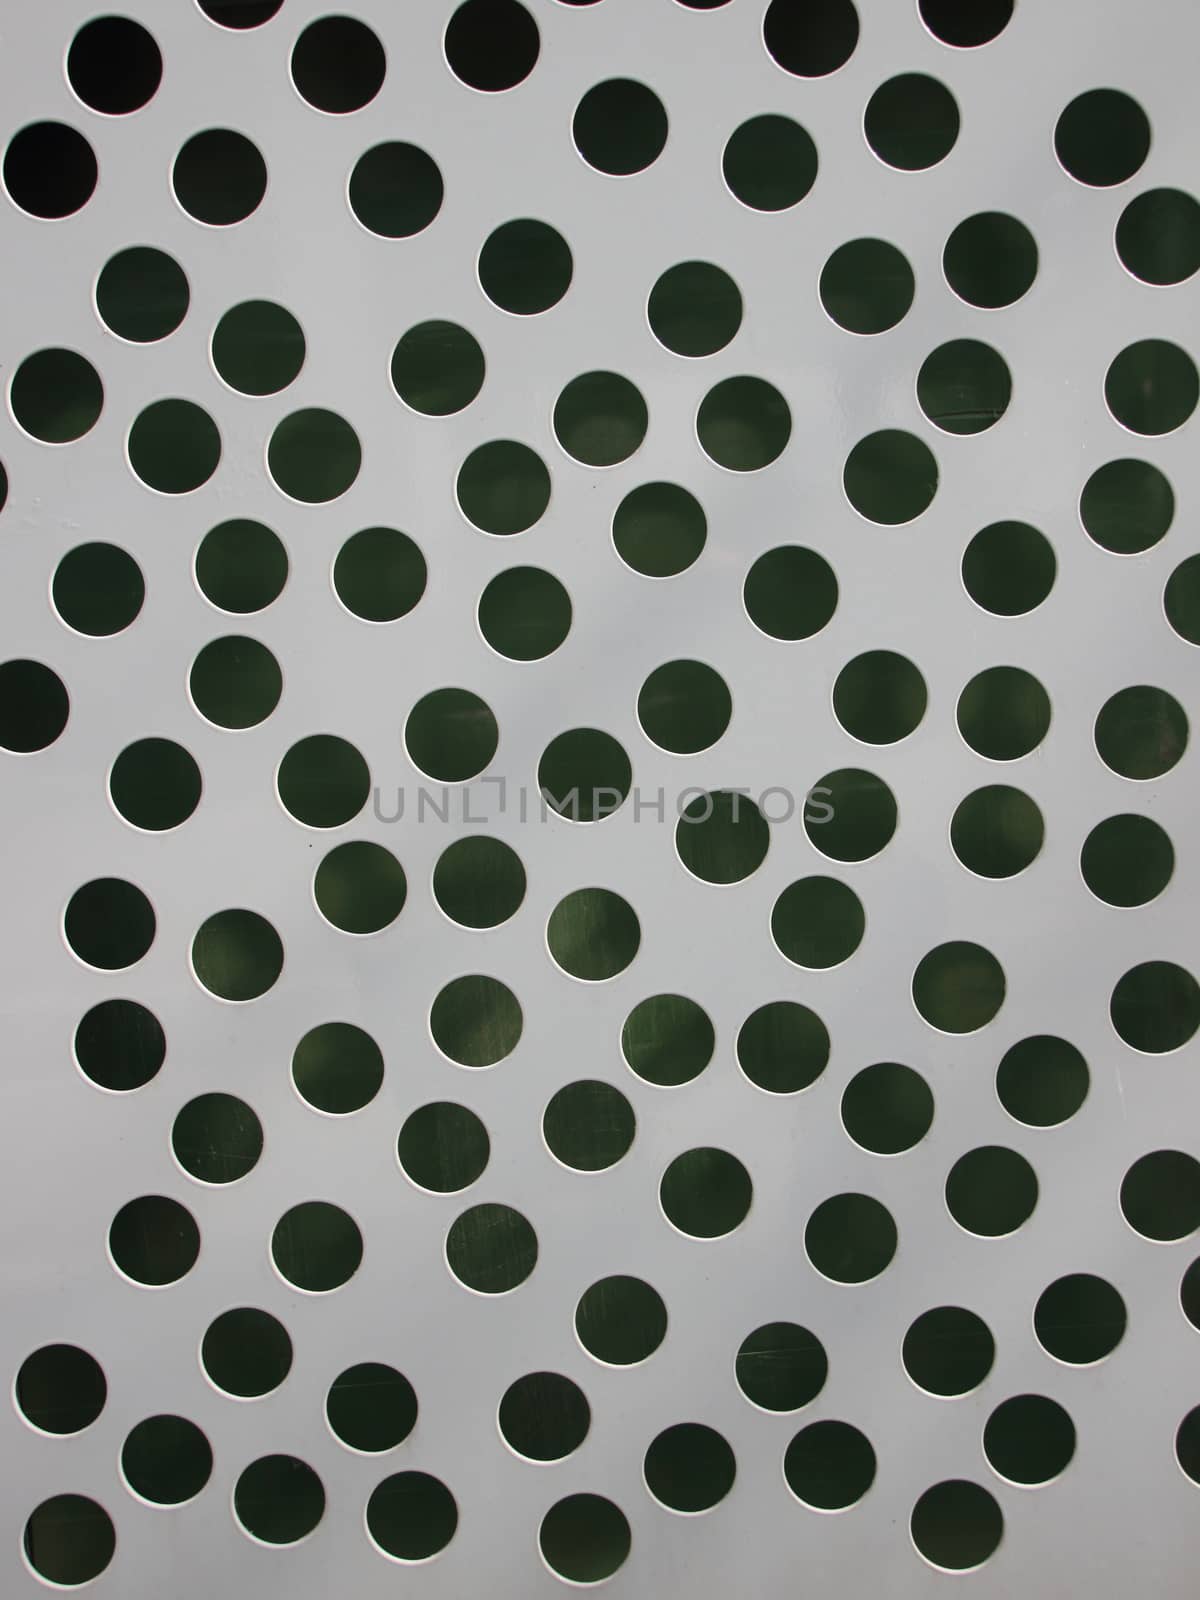 Grey Metal Plate Background with Random Drilled Holes